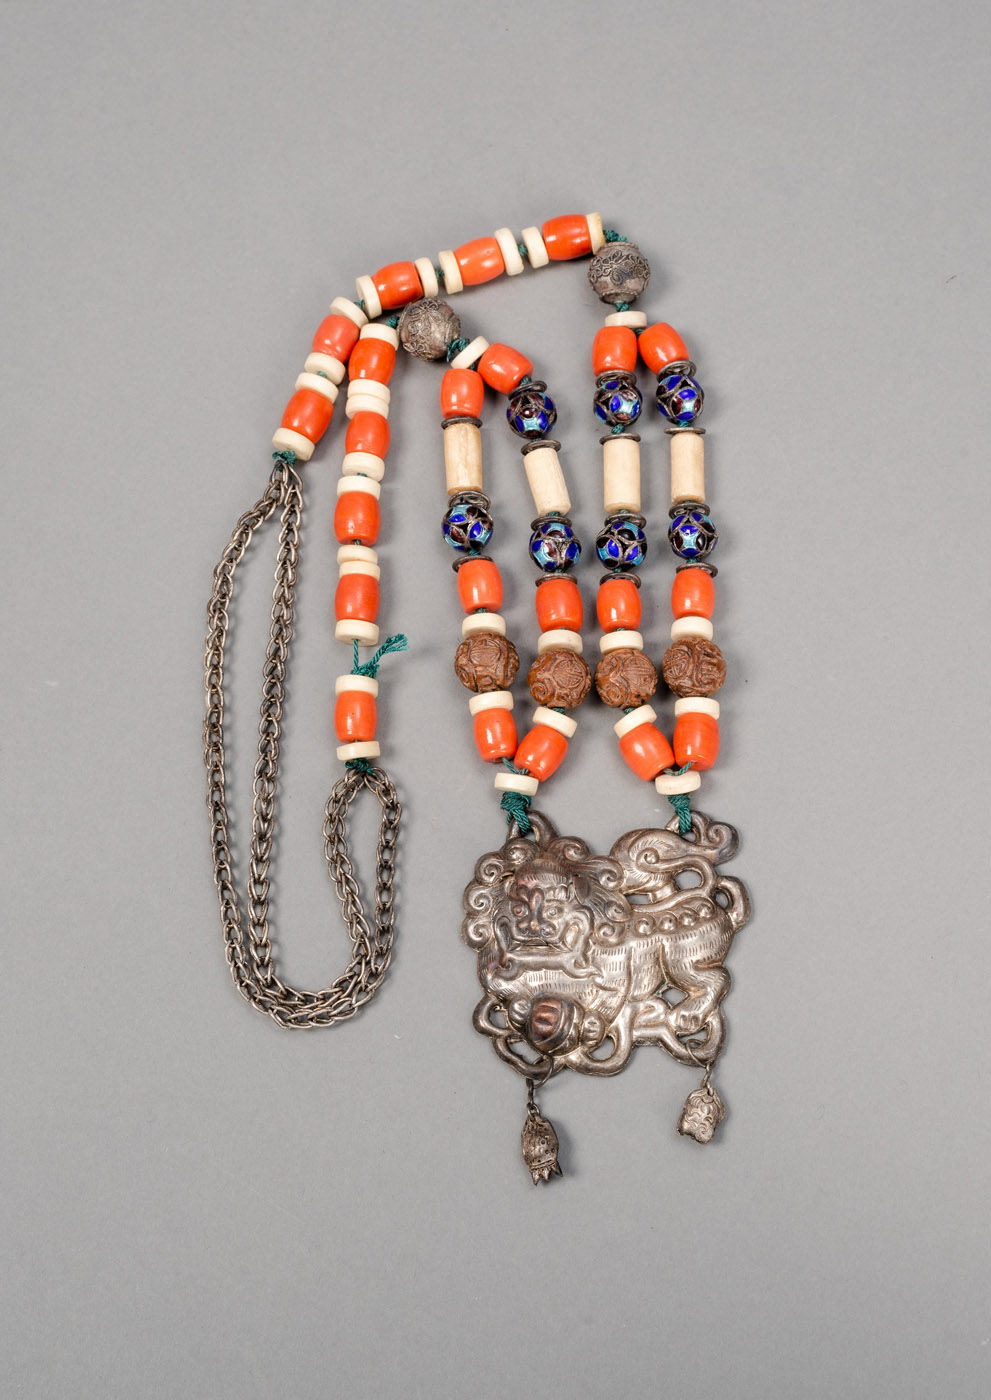 <b>A SILVER BUDDHIST LION PENDANT CORAL, WOOD, AND ENAMEL BEAD NECKLACE</b>